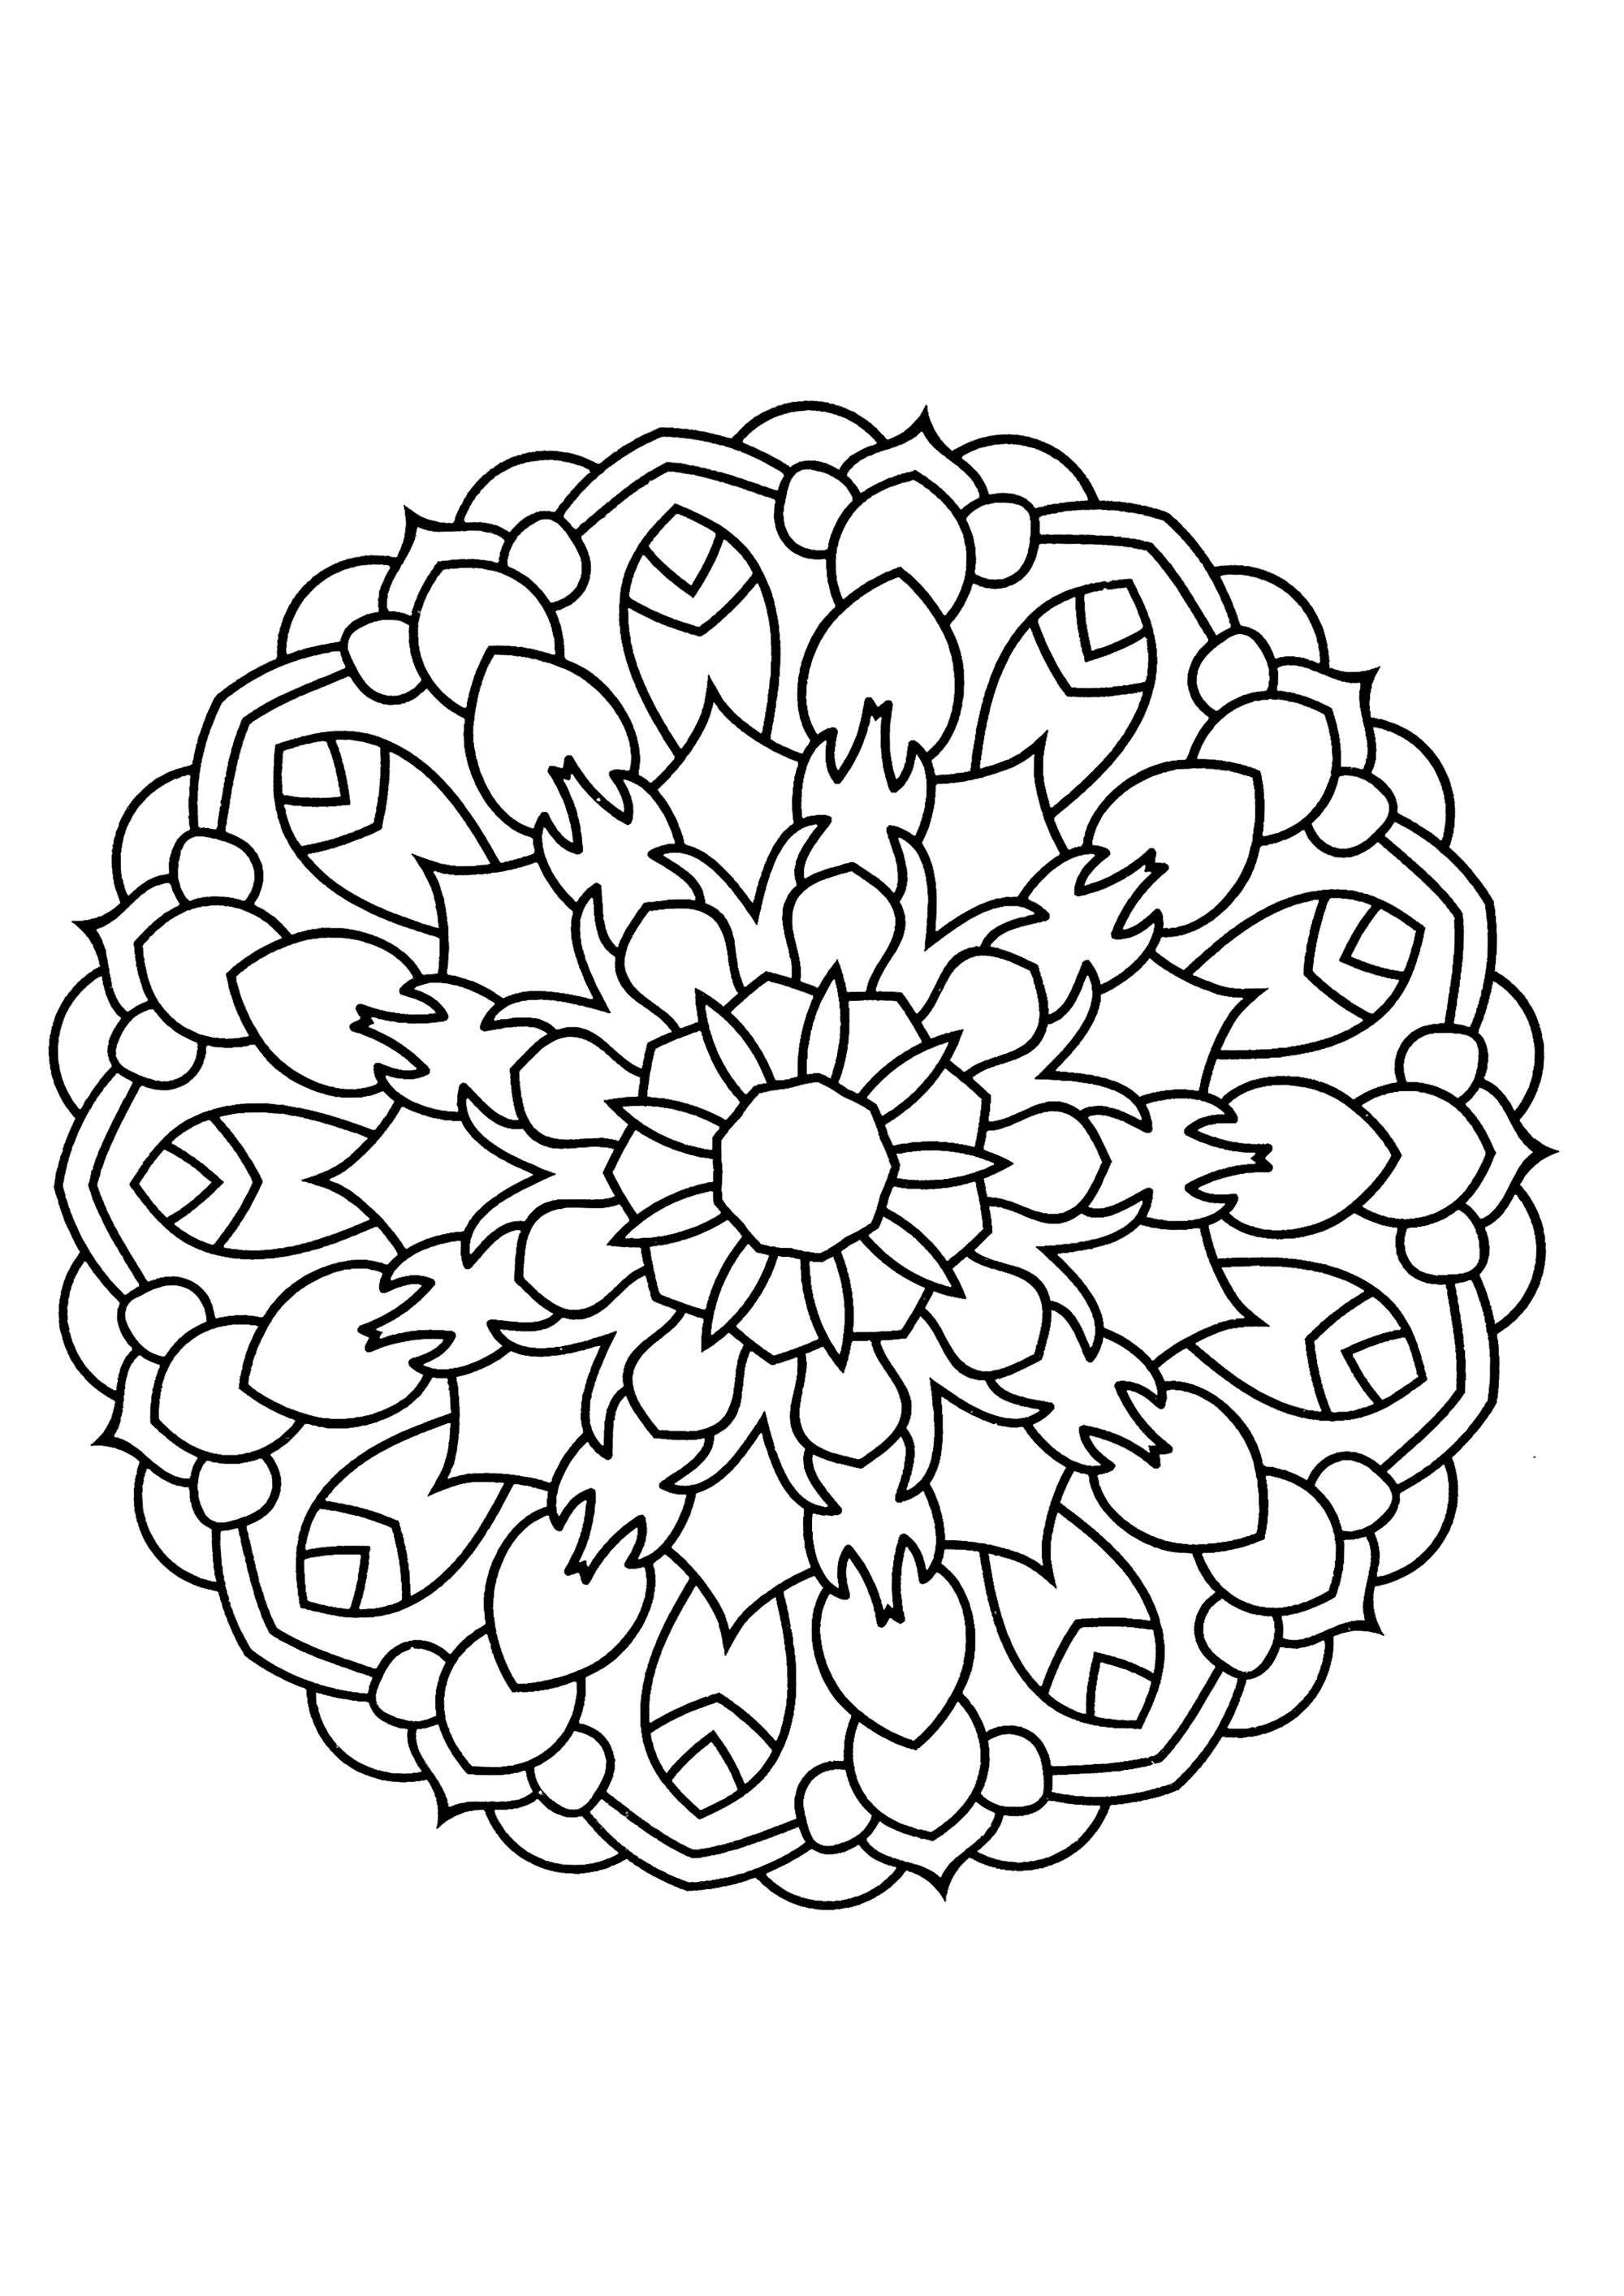 Simple mandala with thick strokes